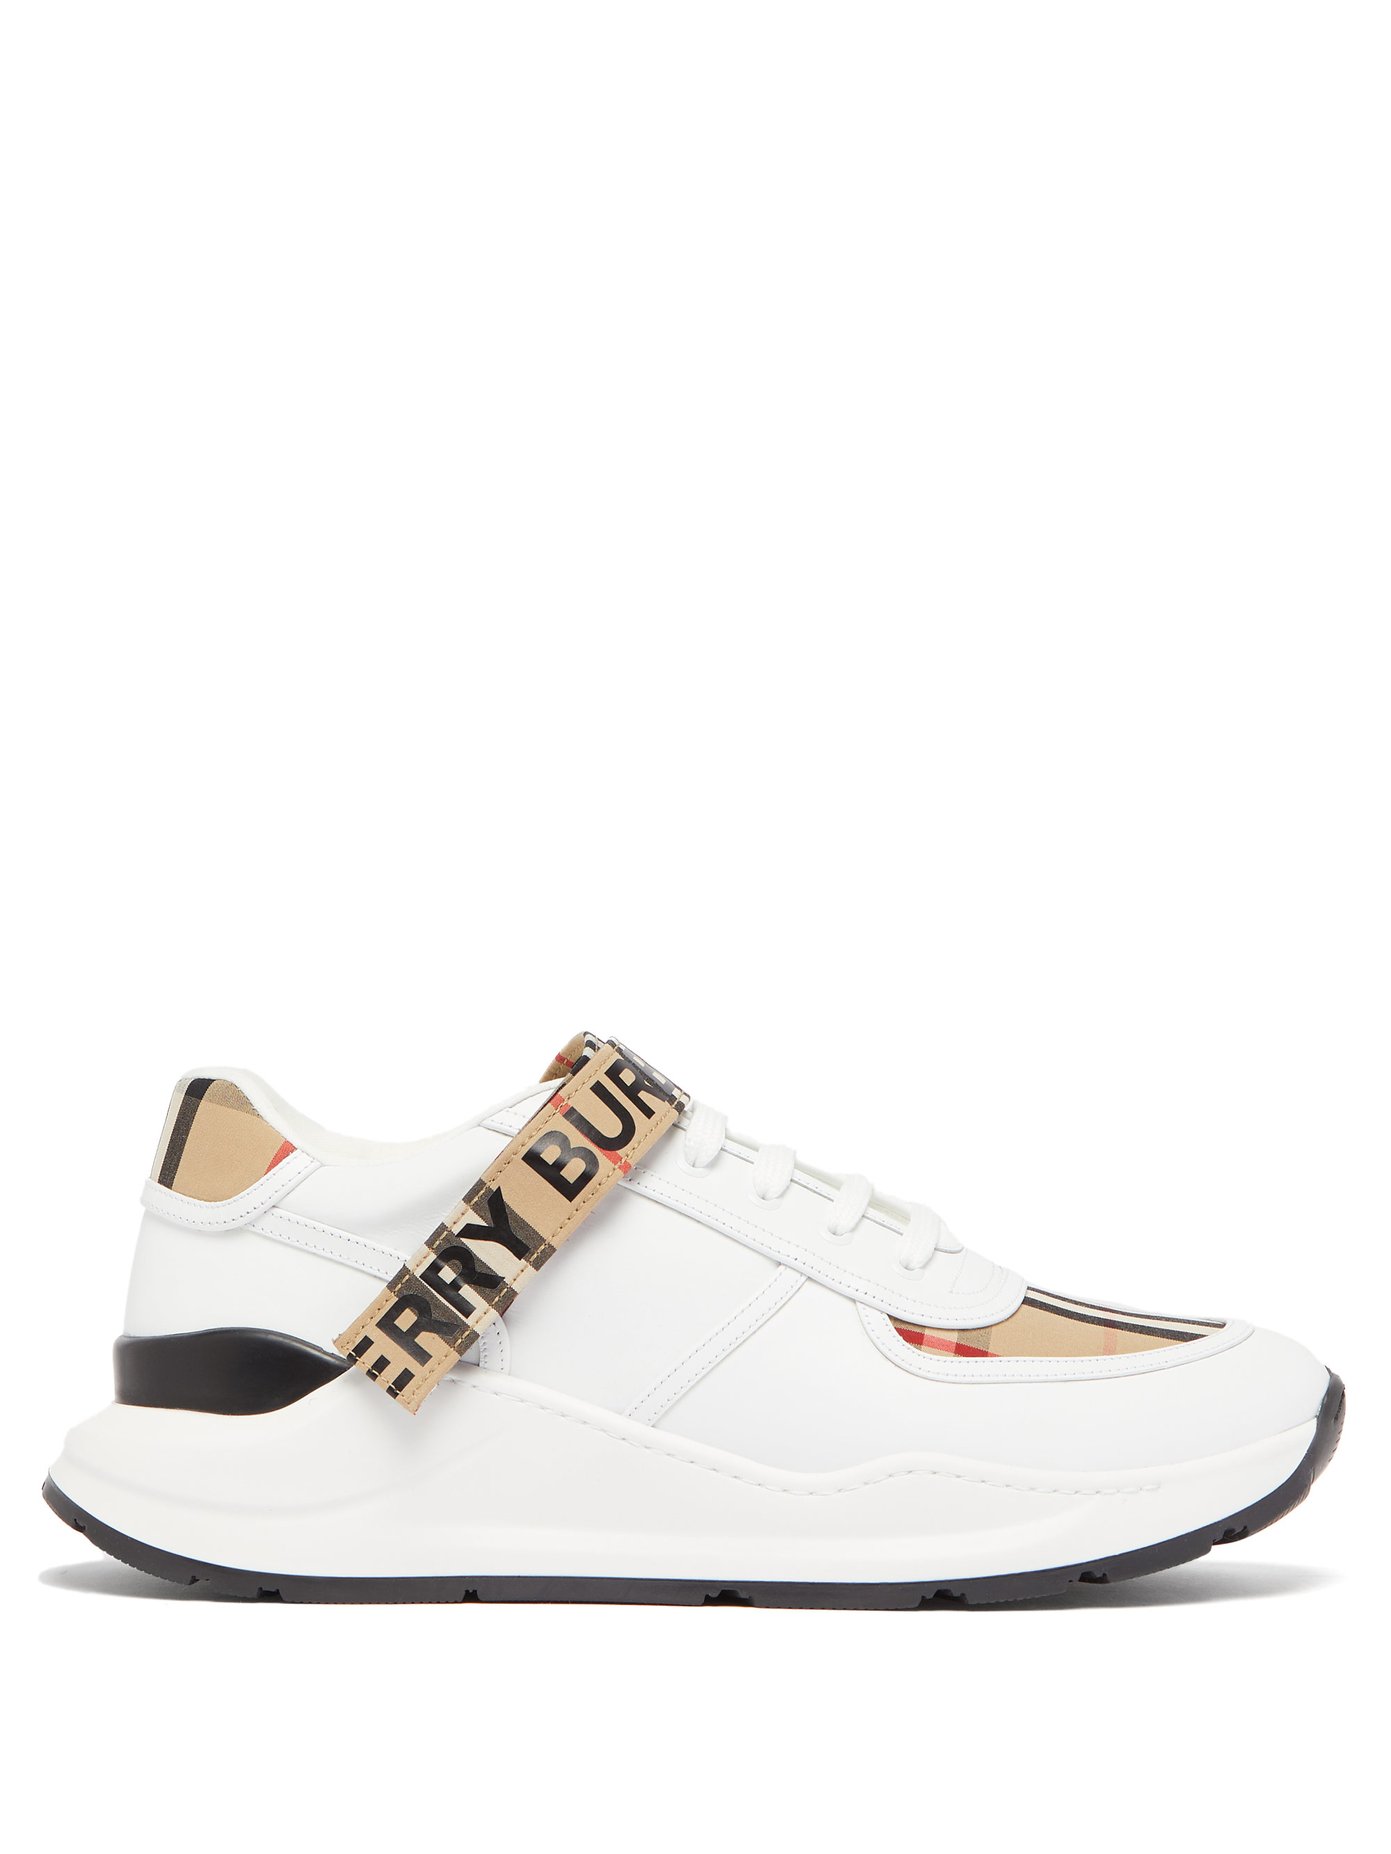 Ronnie leather trainers | Burberry 